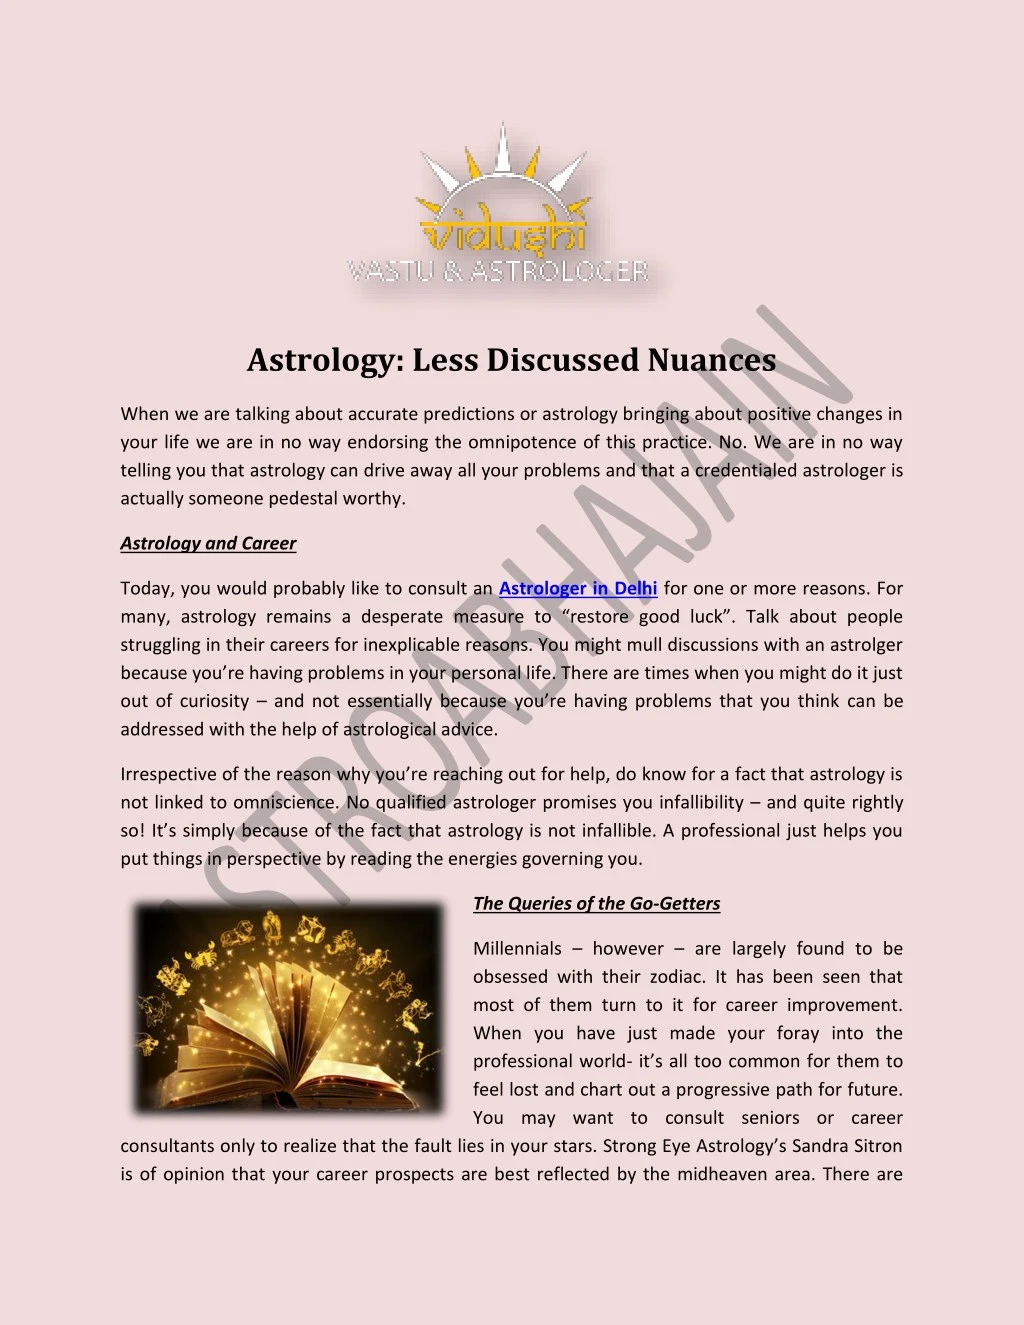 astrology less discussed nuances